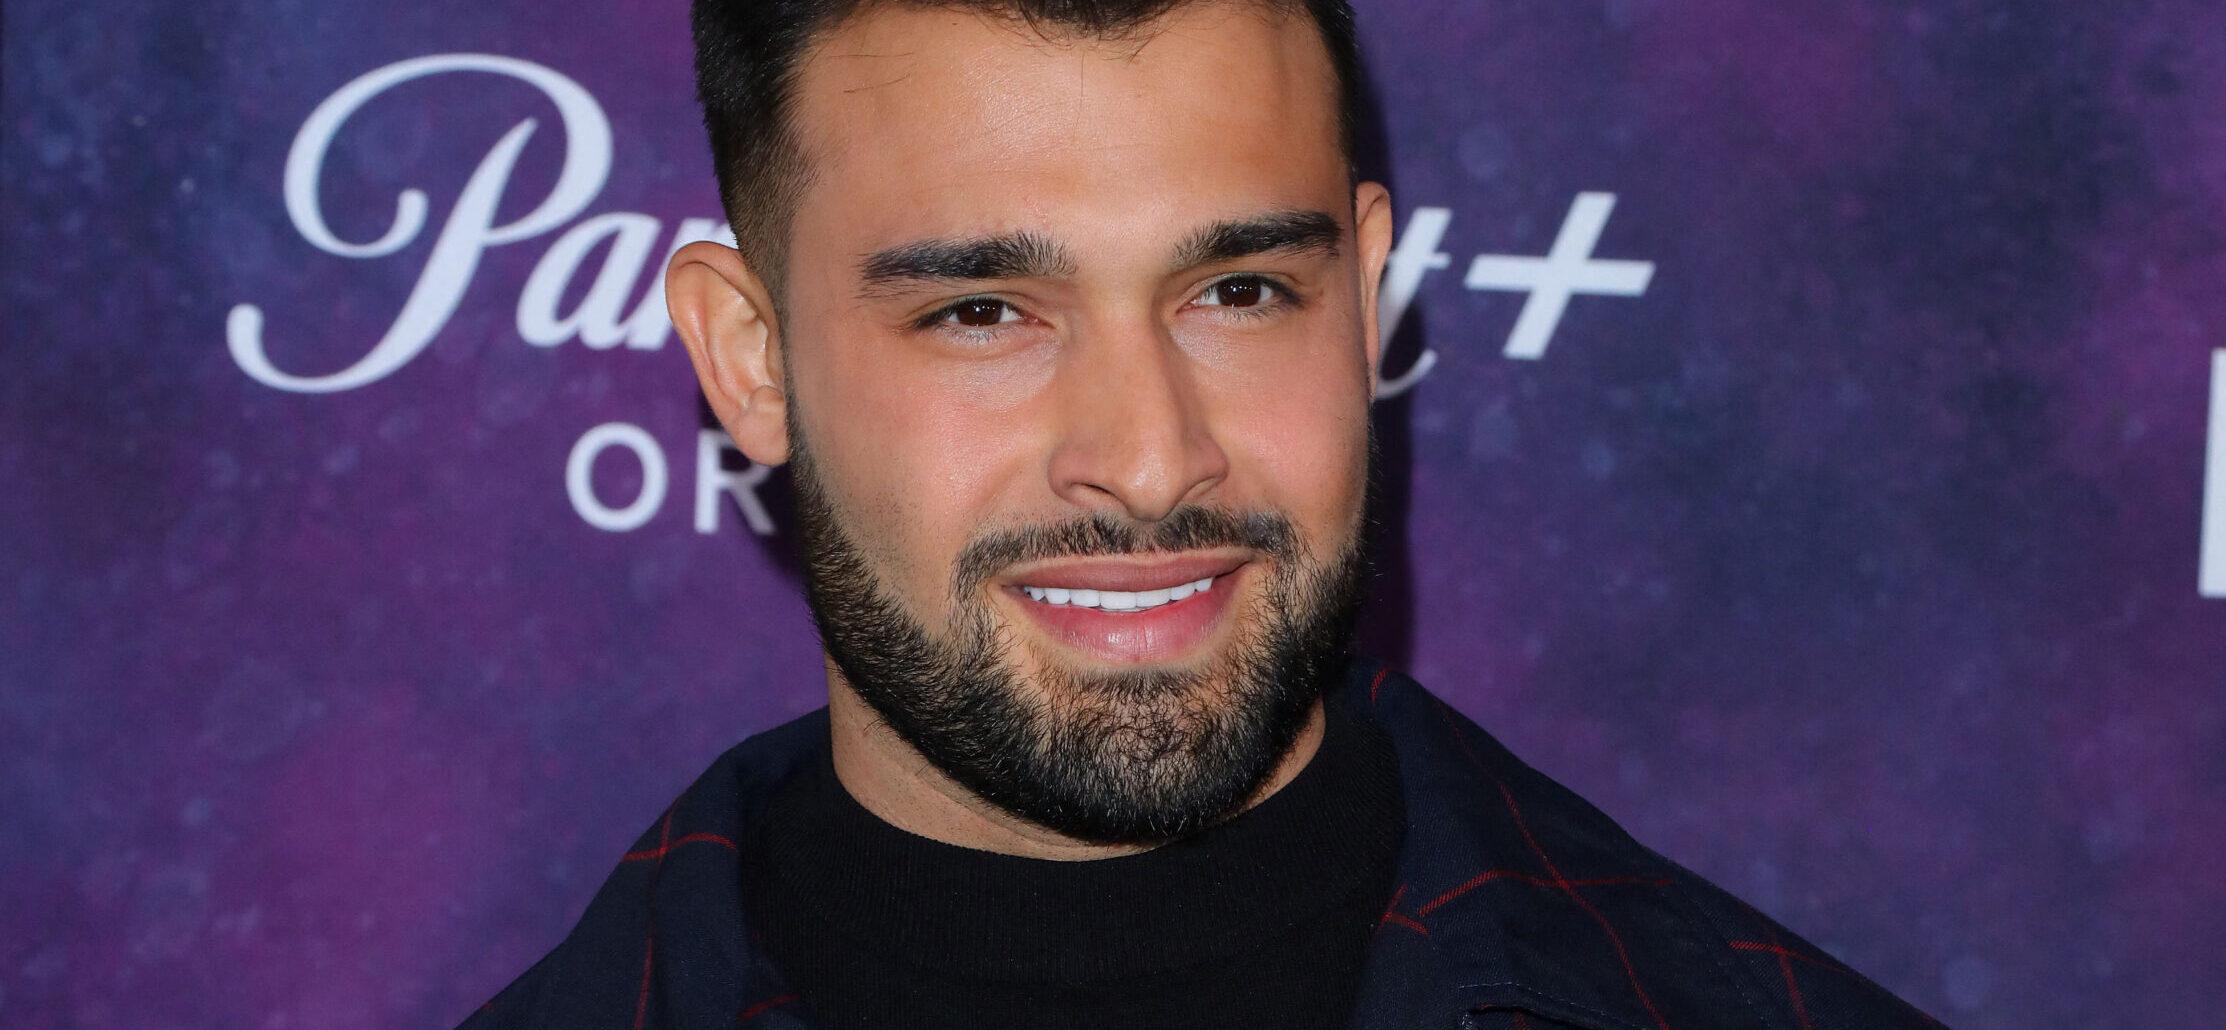 Sam Asghari Hits The Showers For Yet Another Thirst Trap Amid Britney Spears Divorce